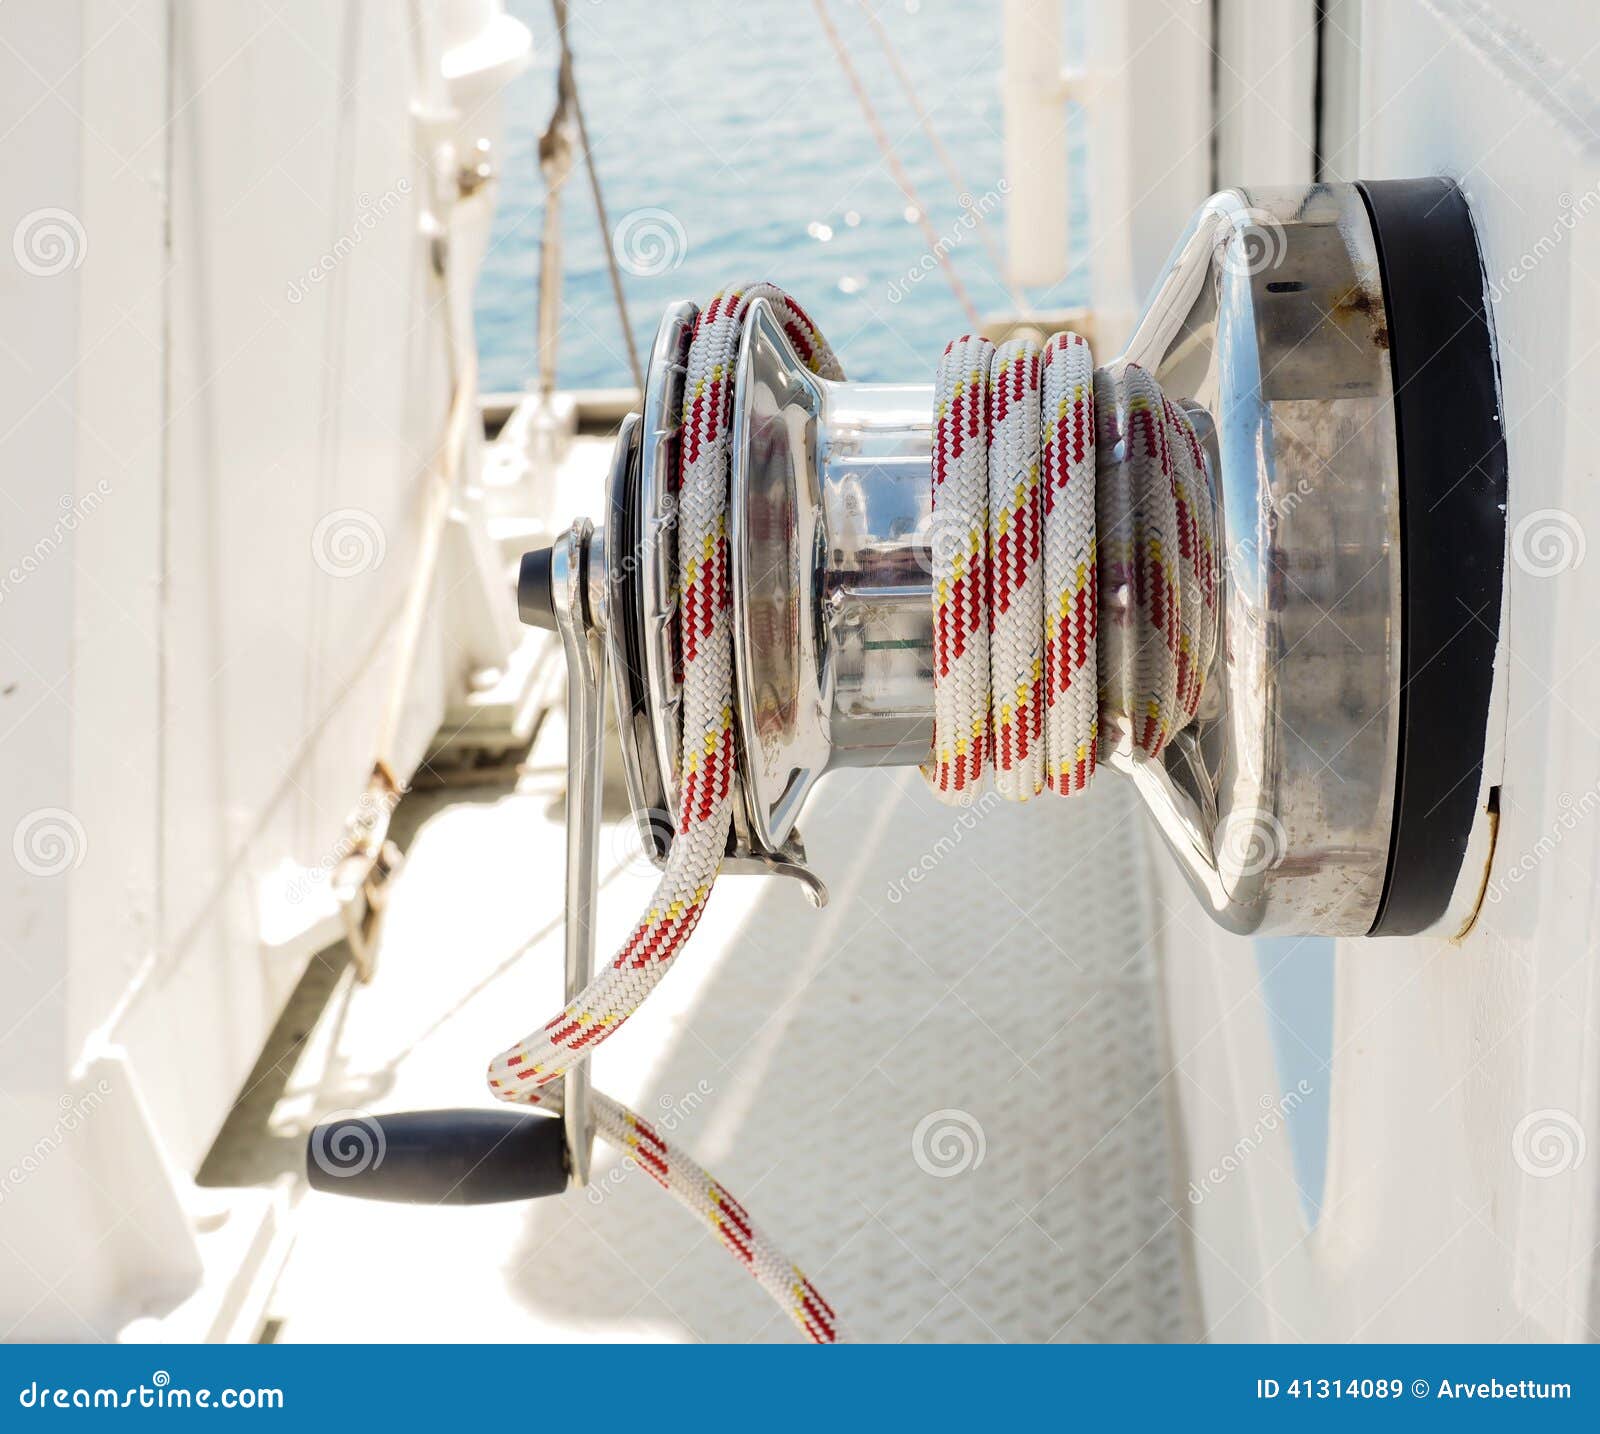 Hand winch with rope stock image. Image of knot, water - 41314089